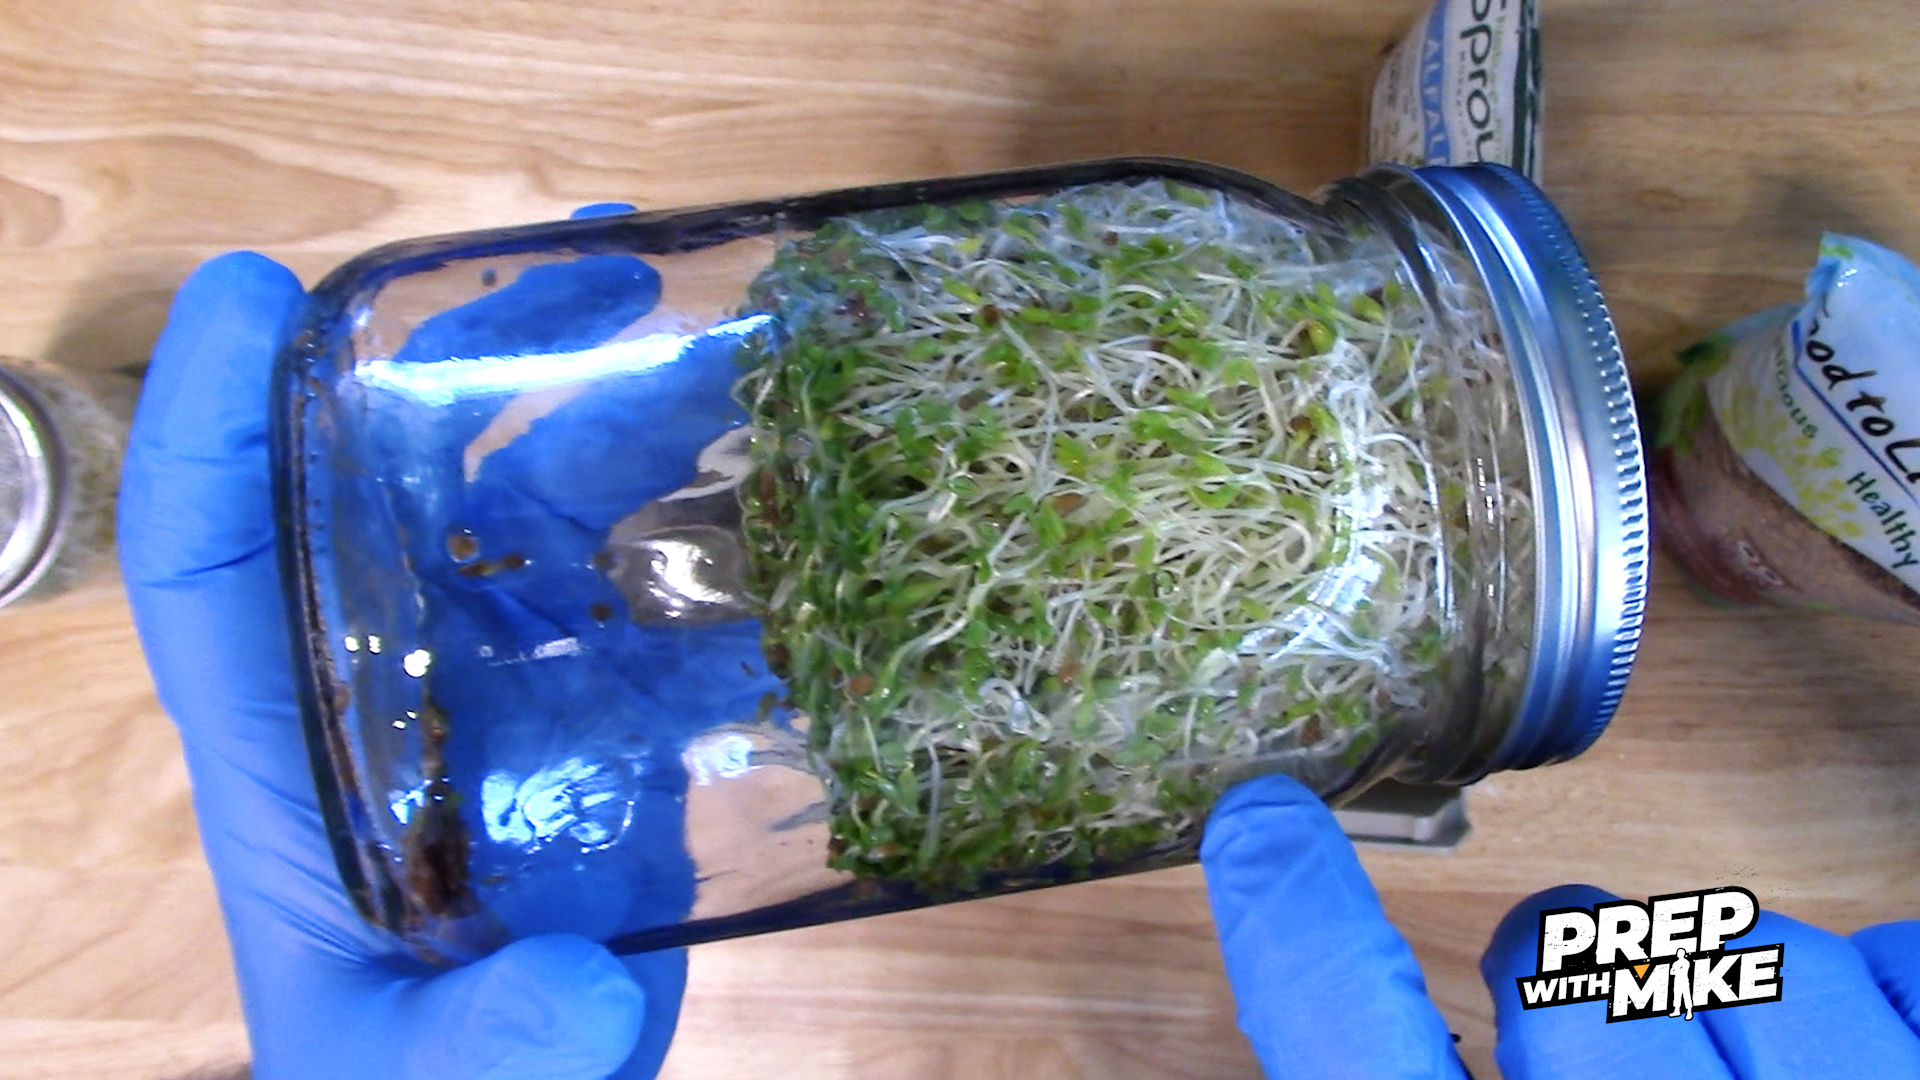 Image: New PrepWithMike video posted: The EASIEST way to grow sprouts and make your own living mineral supplements